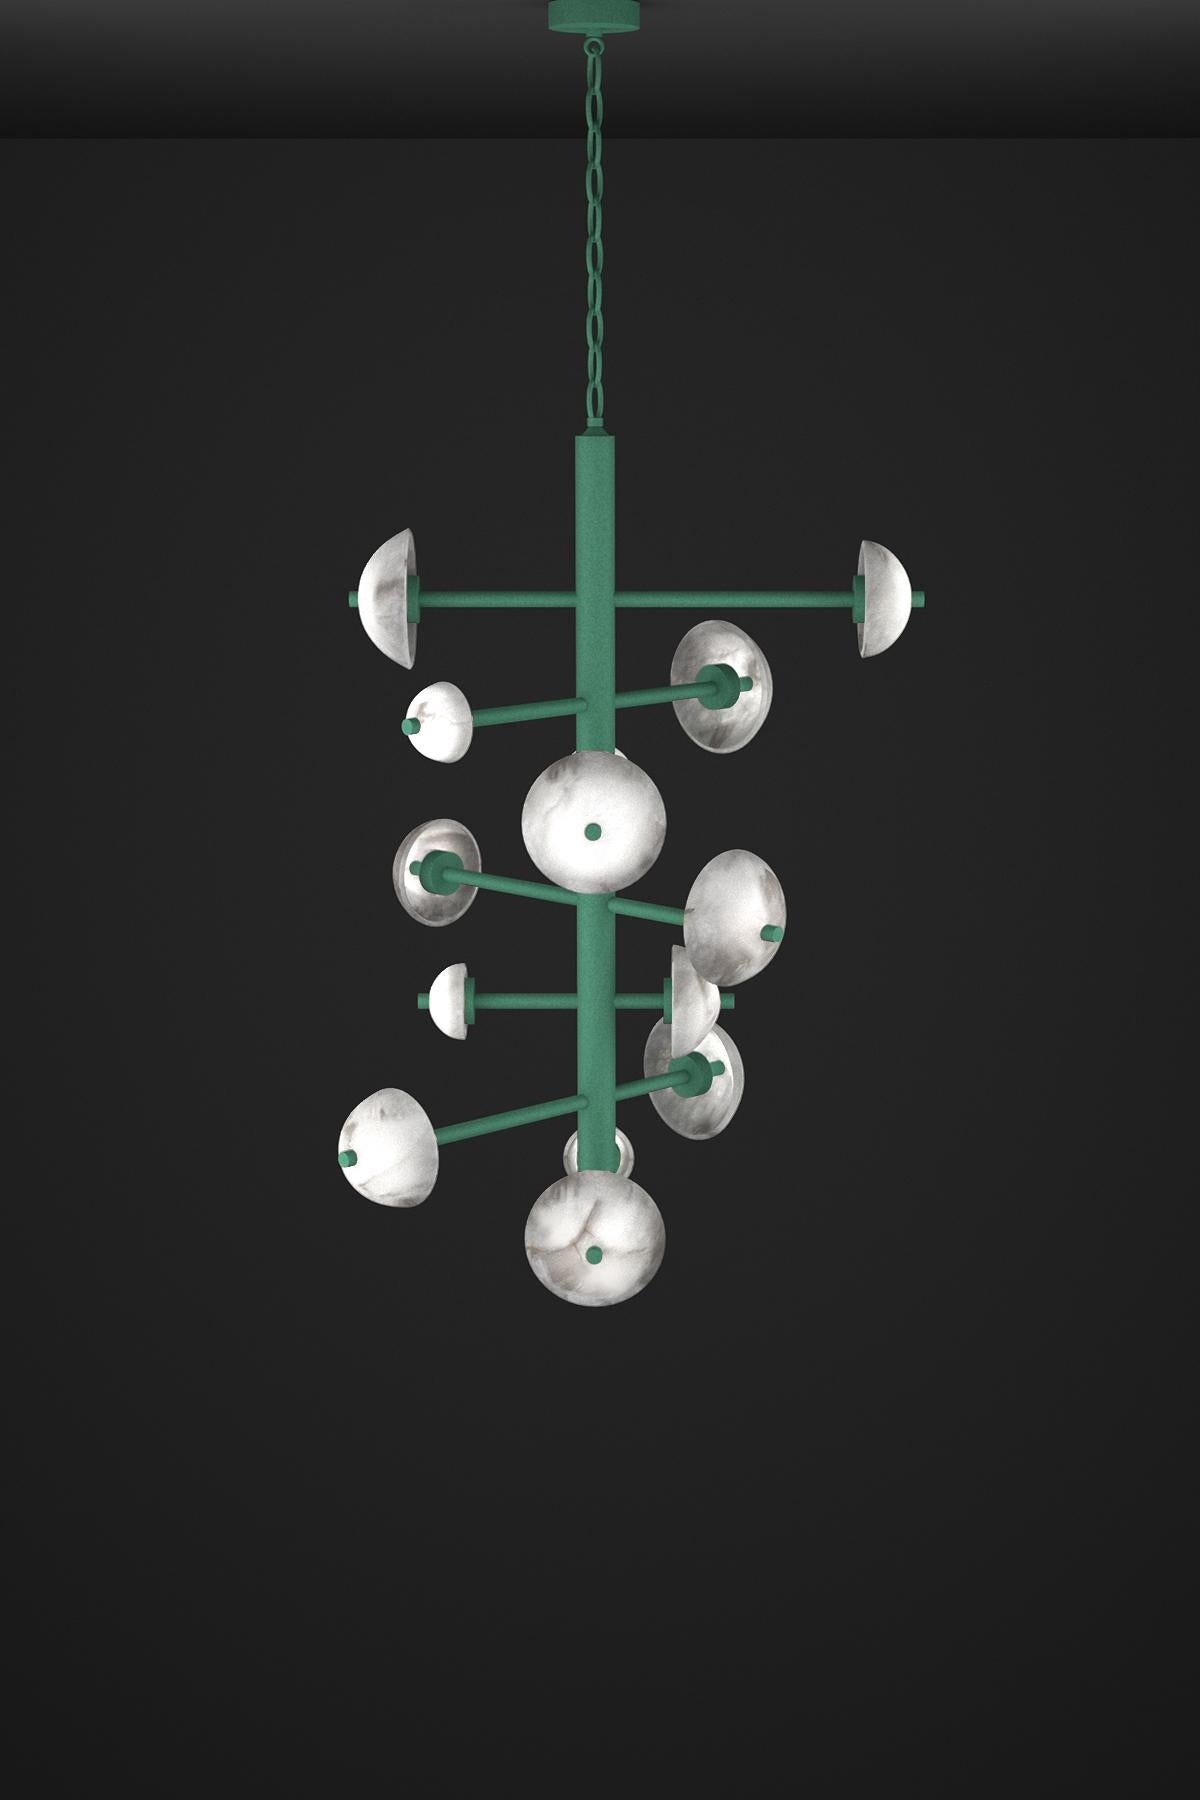 Apollo Freedom Green Metal Chandelier by Alabastro Italiano
Dimensions: D 70,5 x W 55 x H 111 cm.
Materials: White alabaster and metal.

Available in different finishes: Shiny Silver, Bronze, Brushed Brass, Ruggine of Florence, Brushed Burnished,